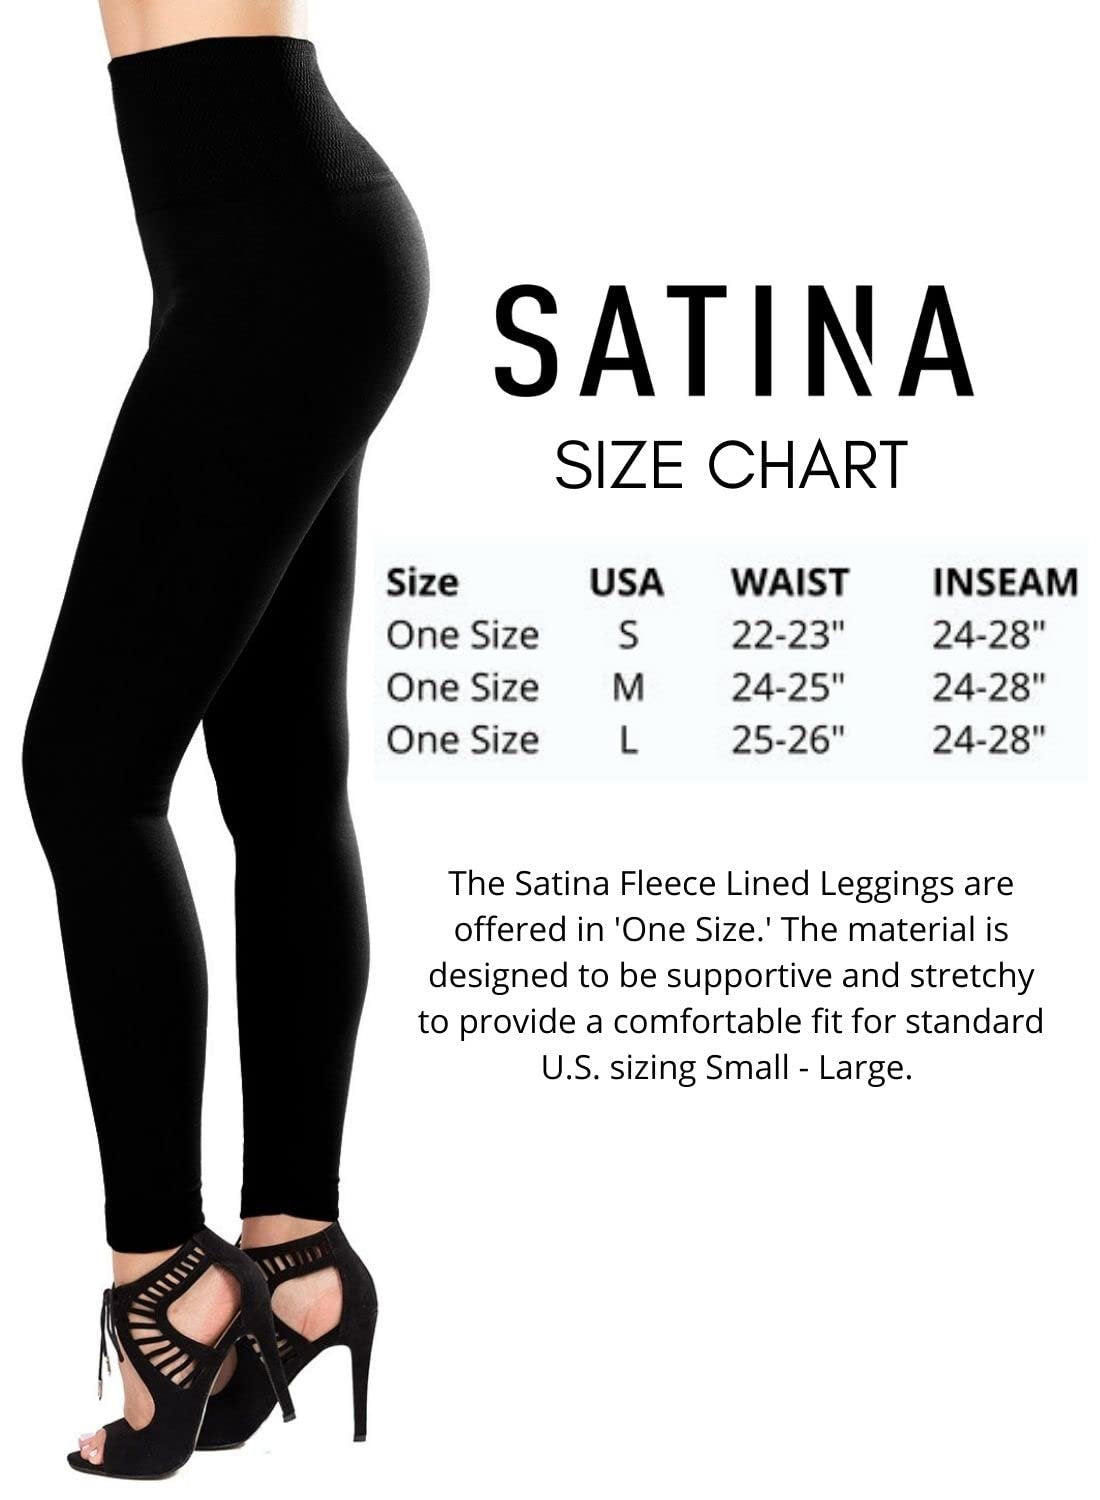 SATINA Black High Waisted Leggings, Tummy Control & Compression, One Size Fits Most